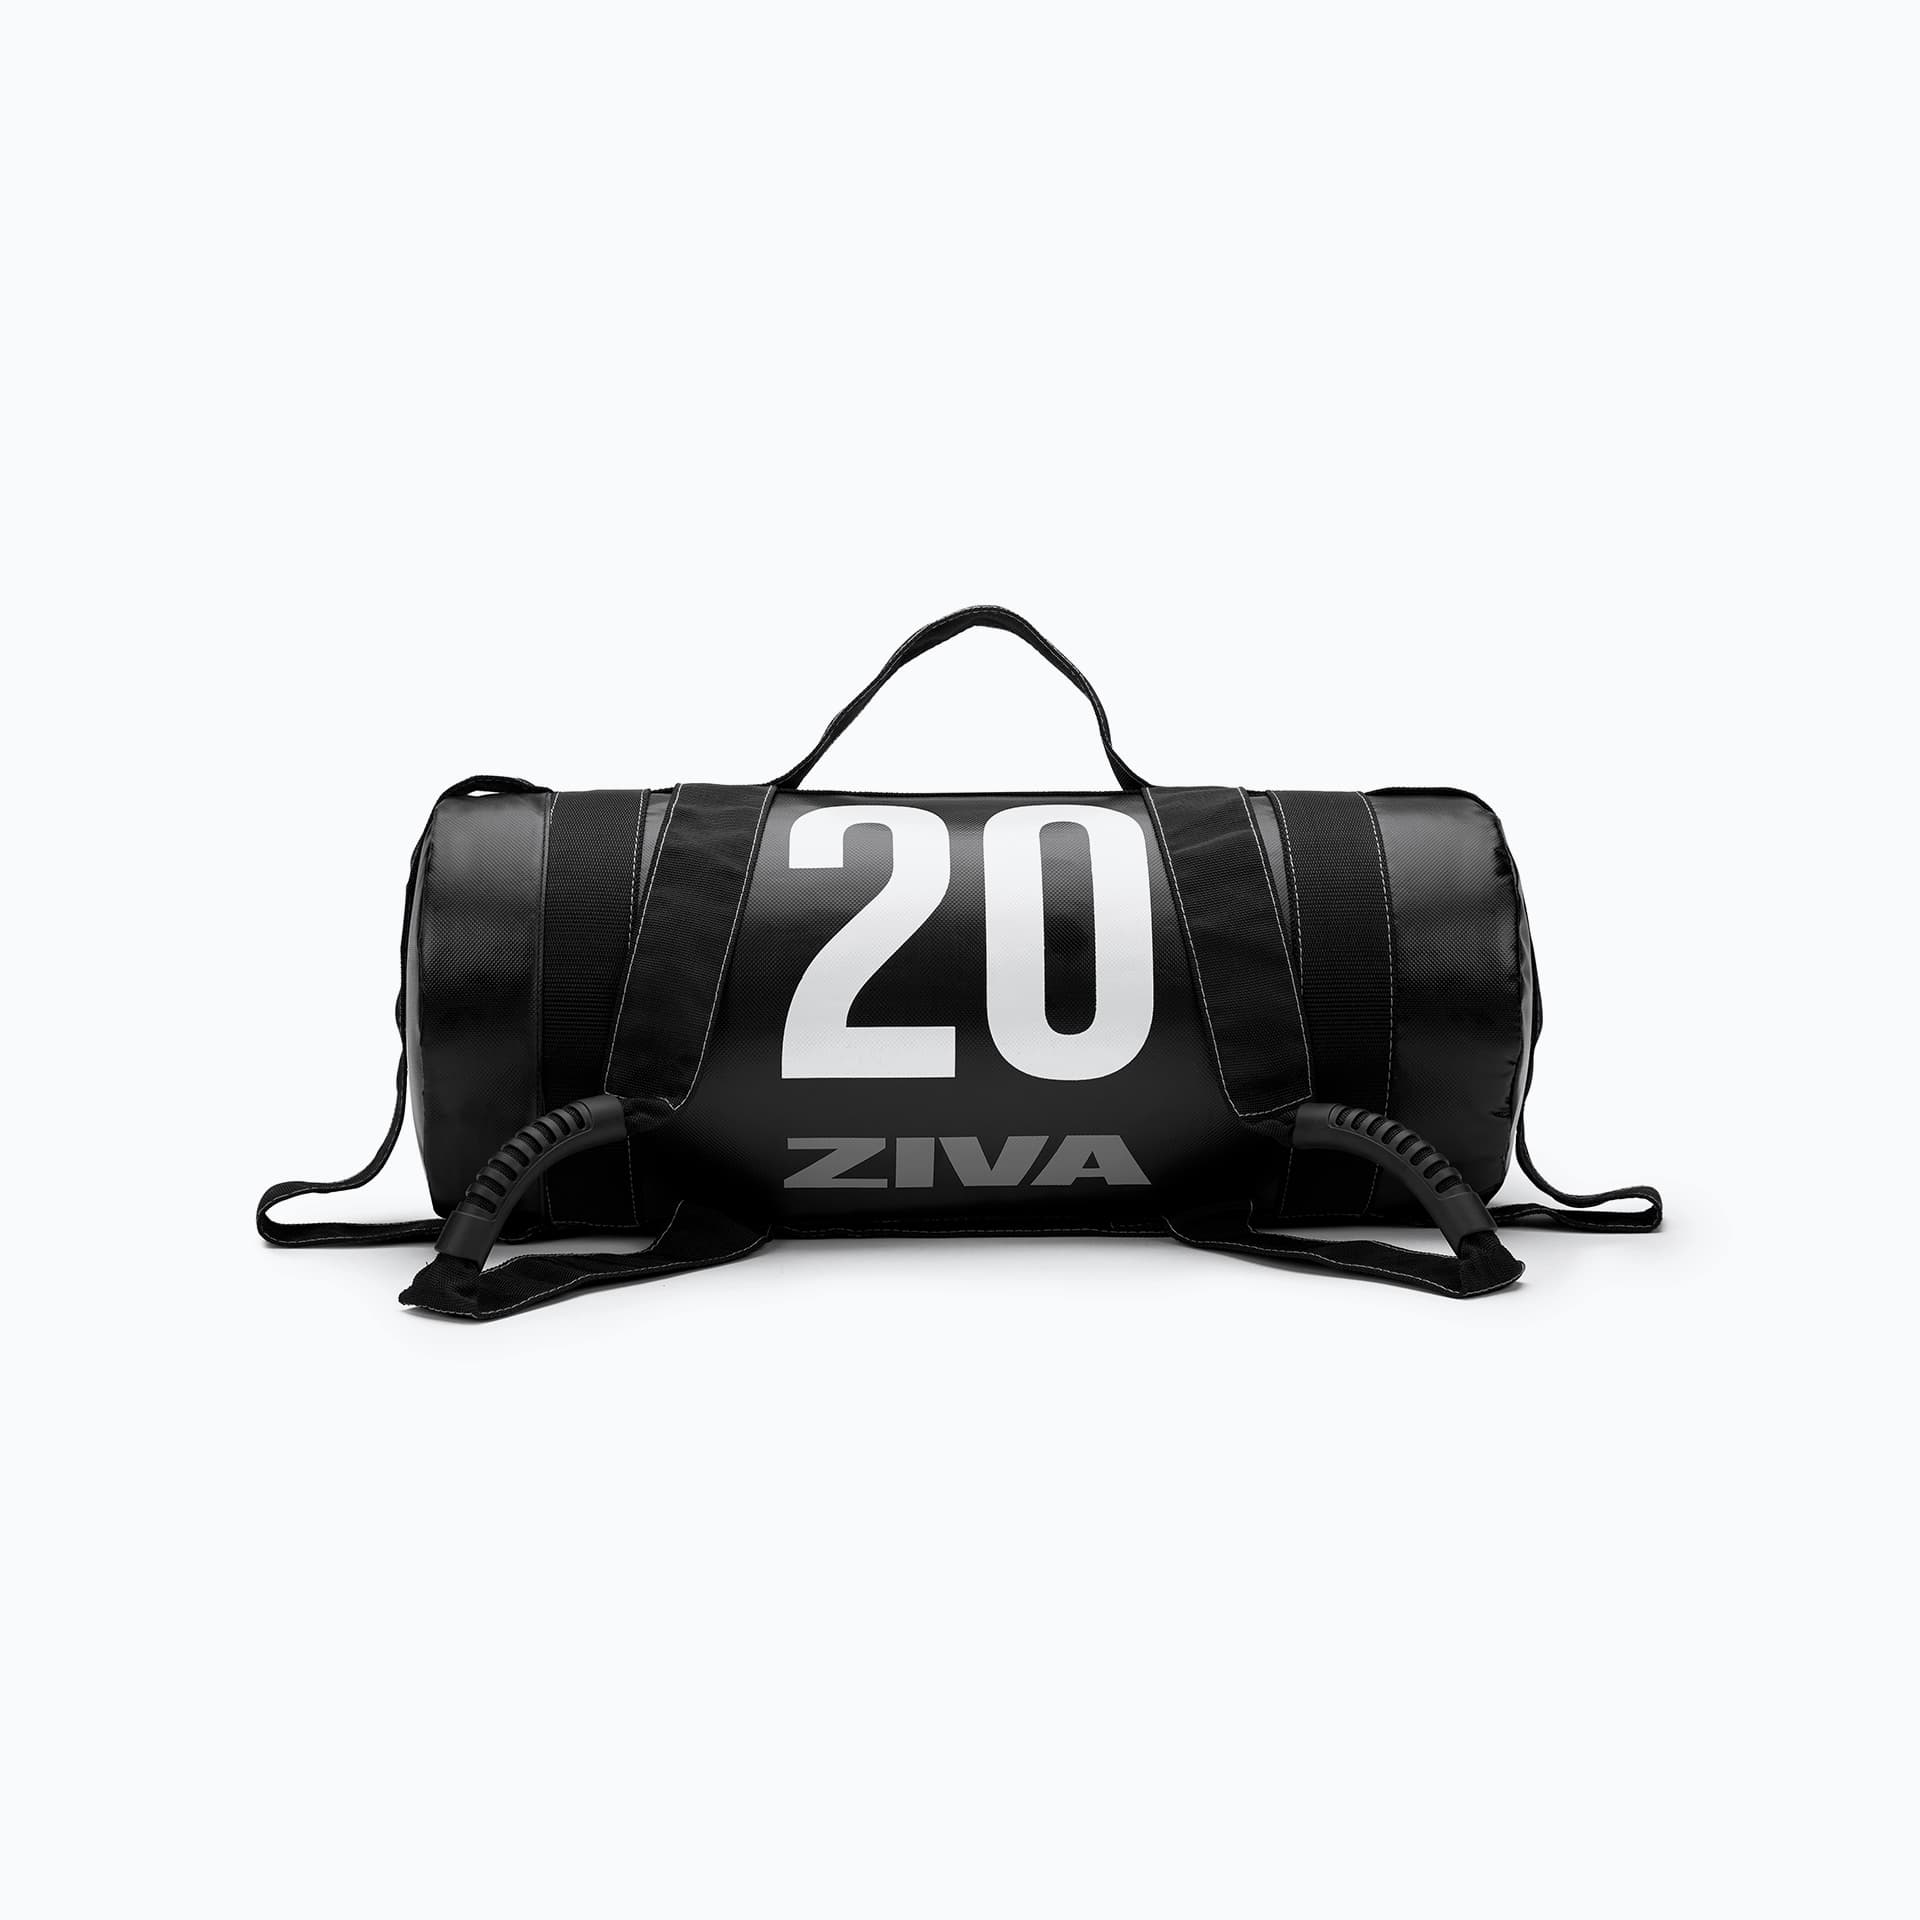 PERFORMANCE POWER CORE BAGS